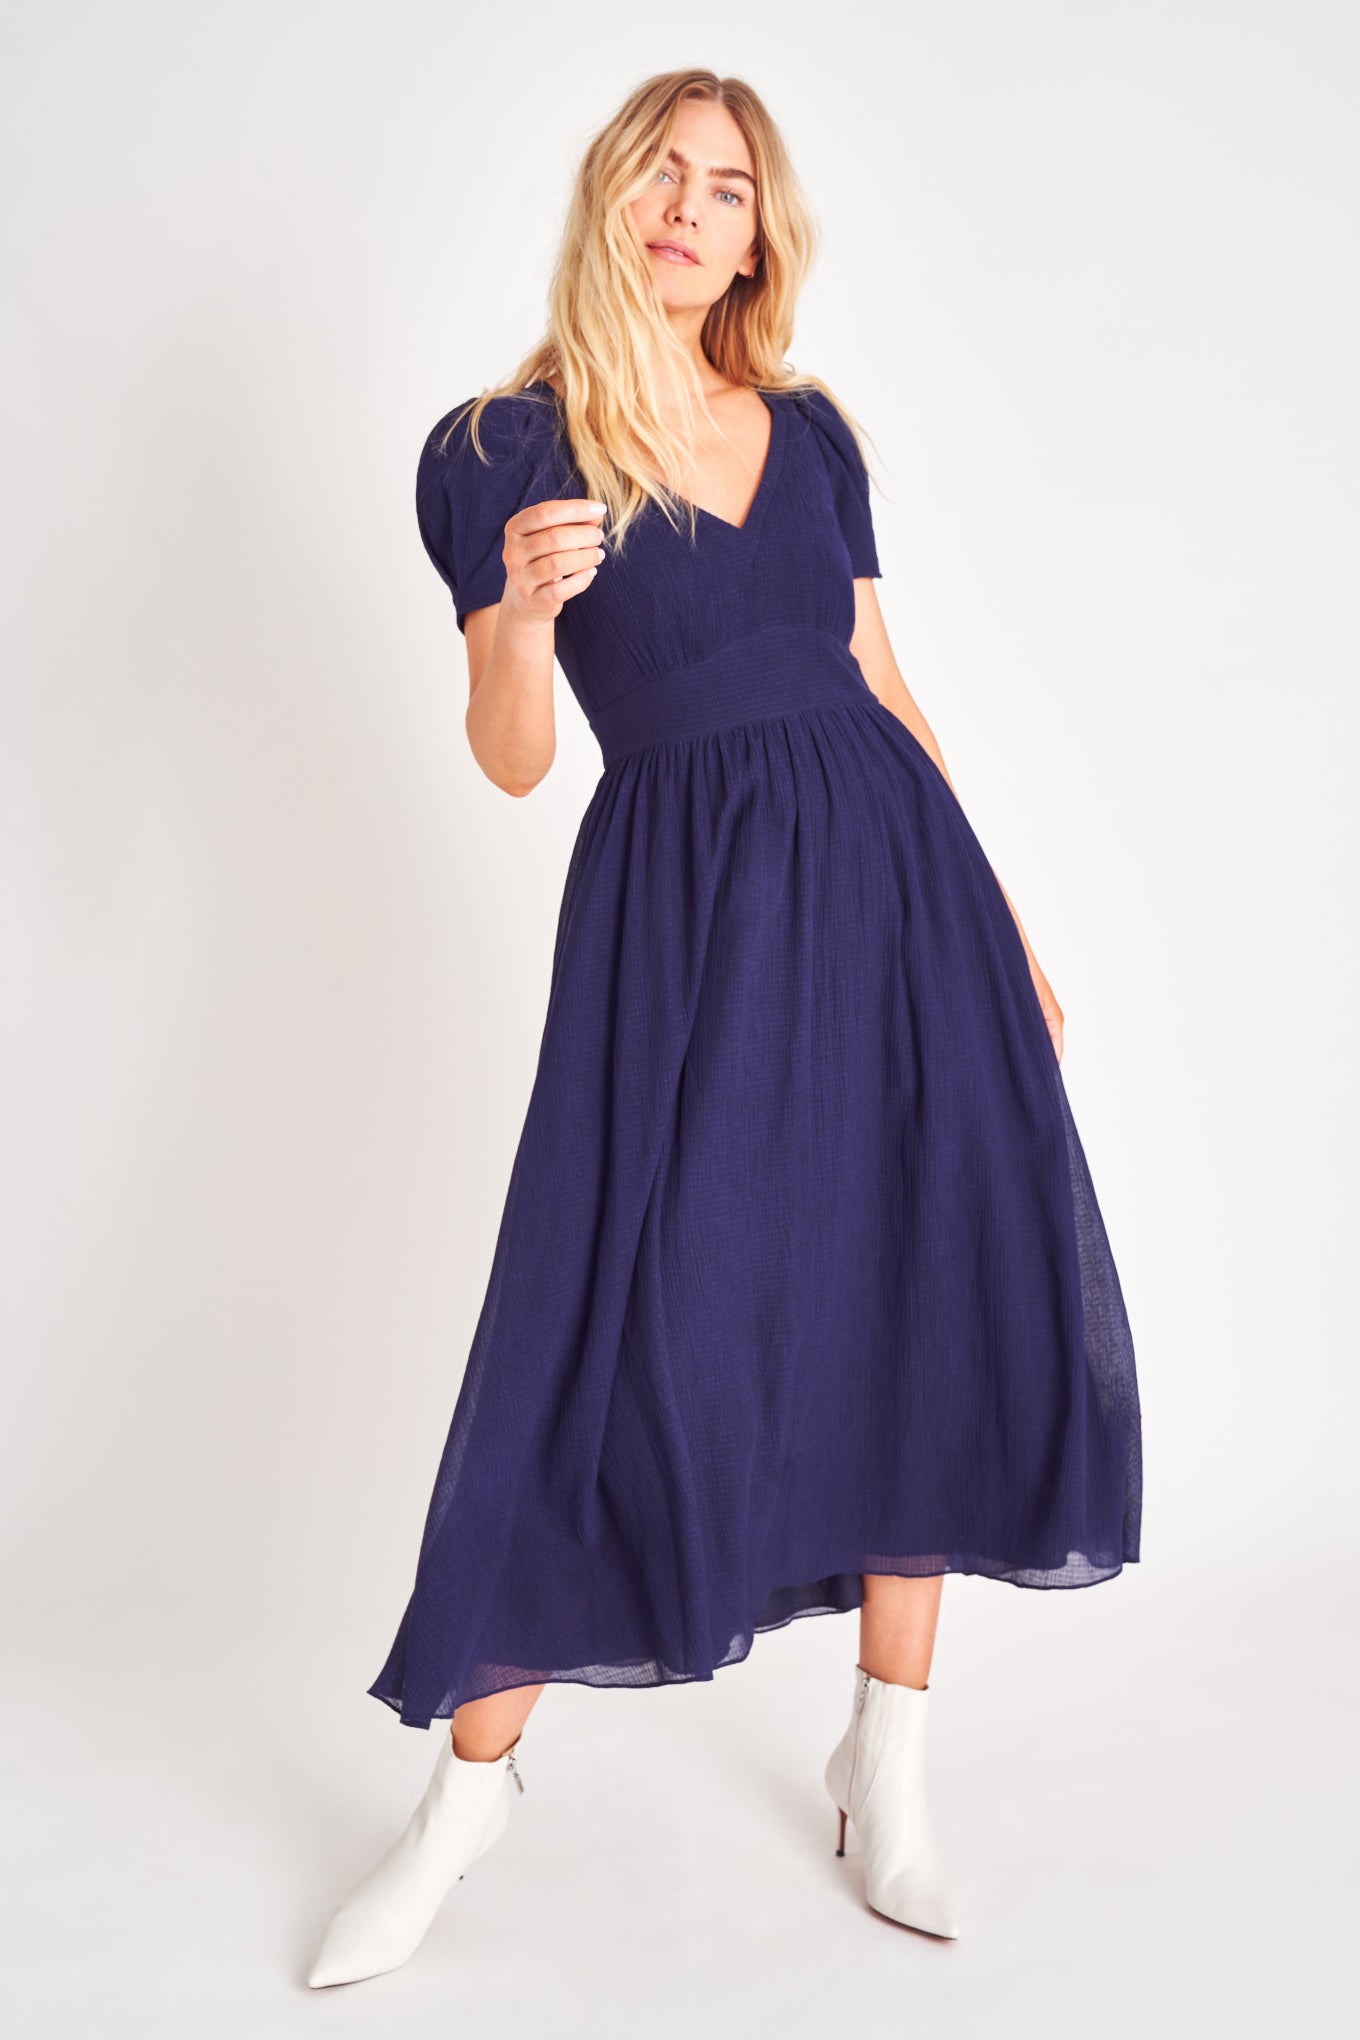 Puff sleeve v neck midi dress with fitted waist.